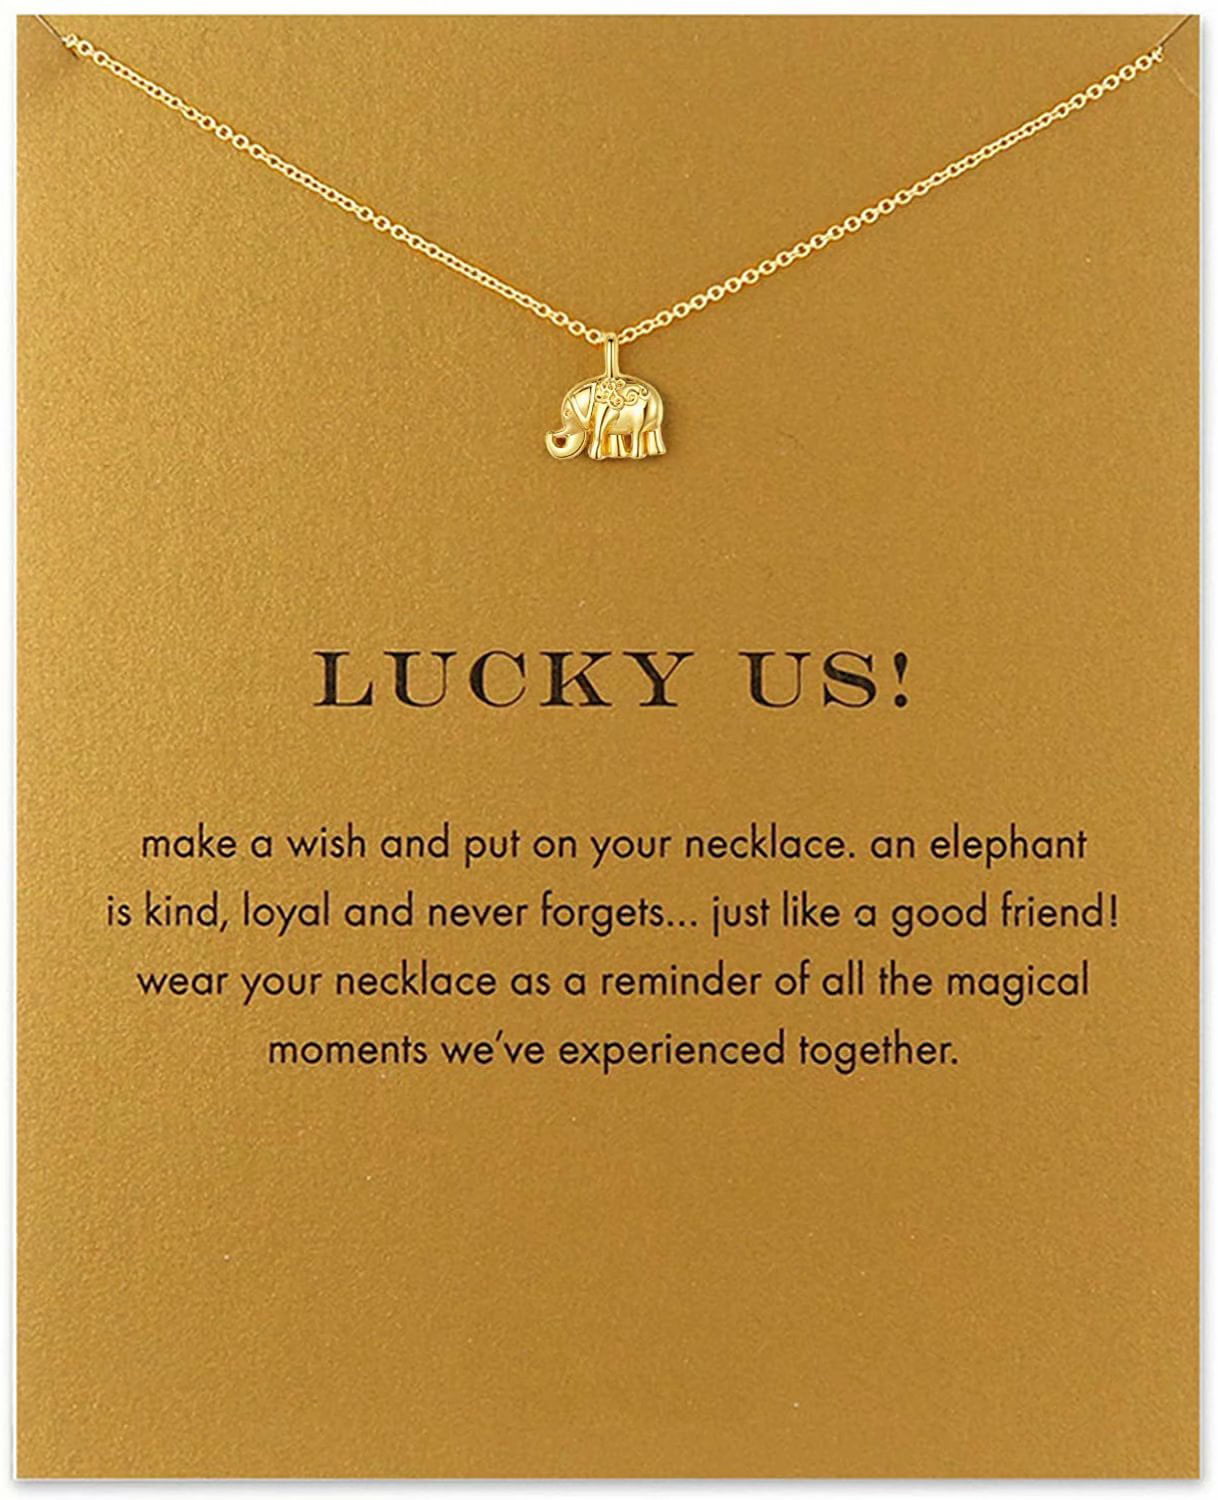 Hundred River Friendship Anchor Compass Necklace Good Luck Elephant Pendant Chain Necklace with Message Card Gift Card